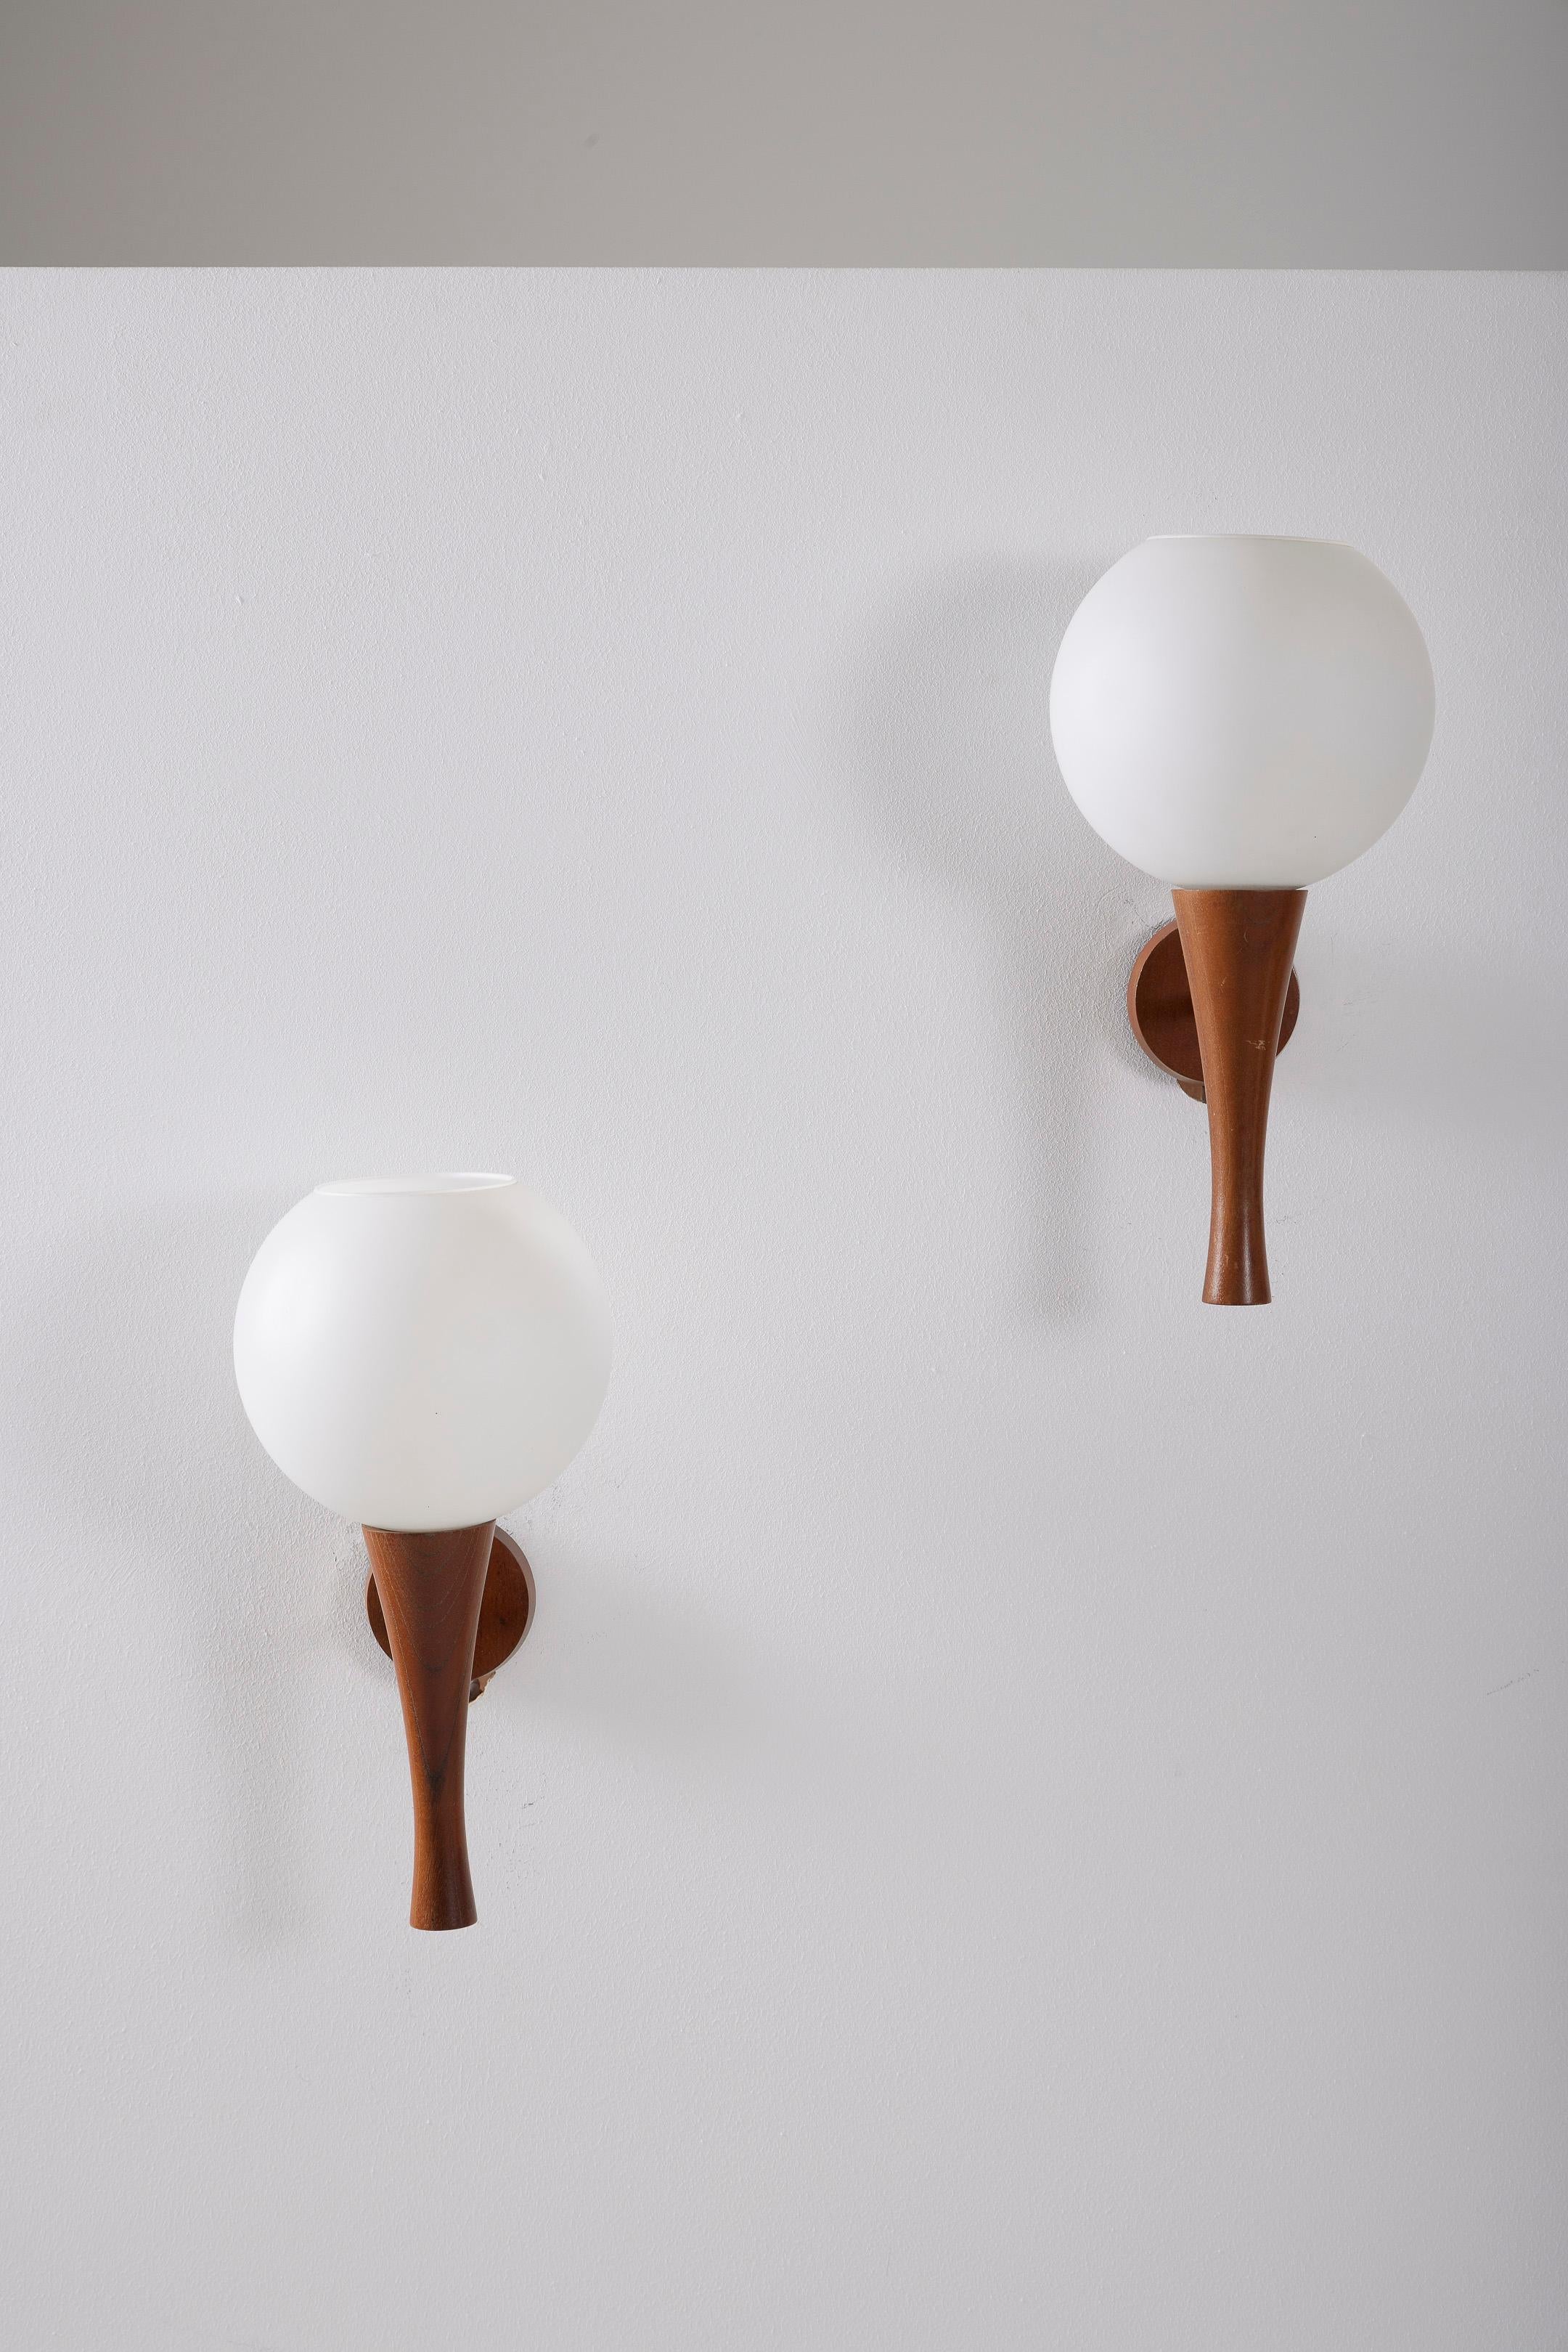 Pair of Scandinavian-style wall sconces, featuring a glass globe diffuser and a wooden structure. In very good condition. These wall sconces would pair perfectly with furniture by designers such as Pierre Chapo or Jean Prouvé.
DV74